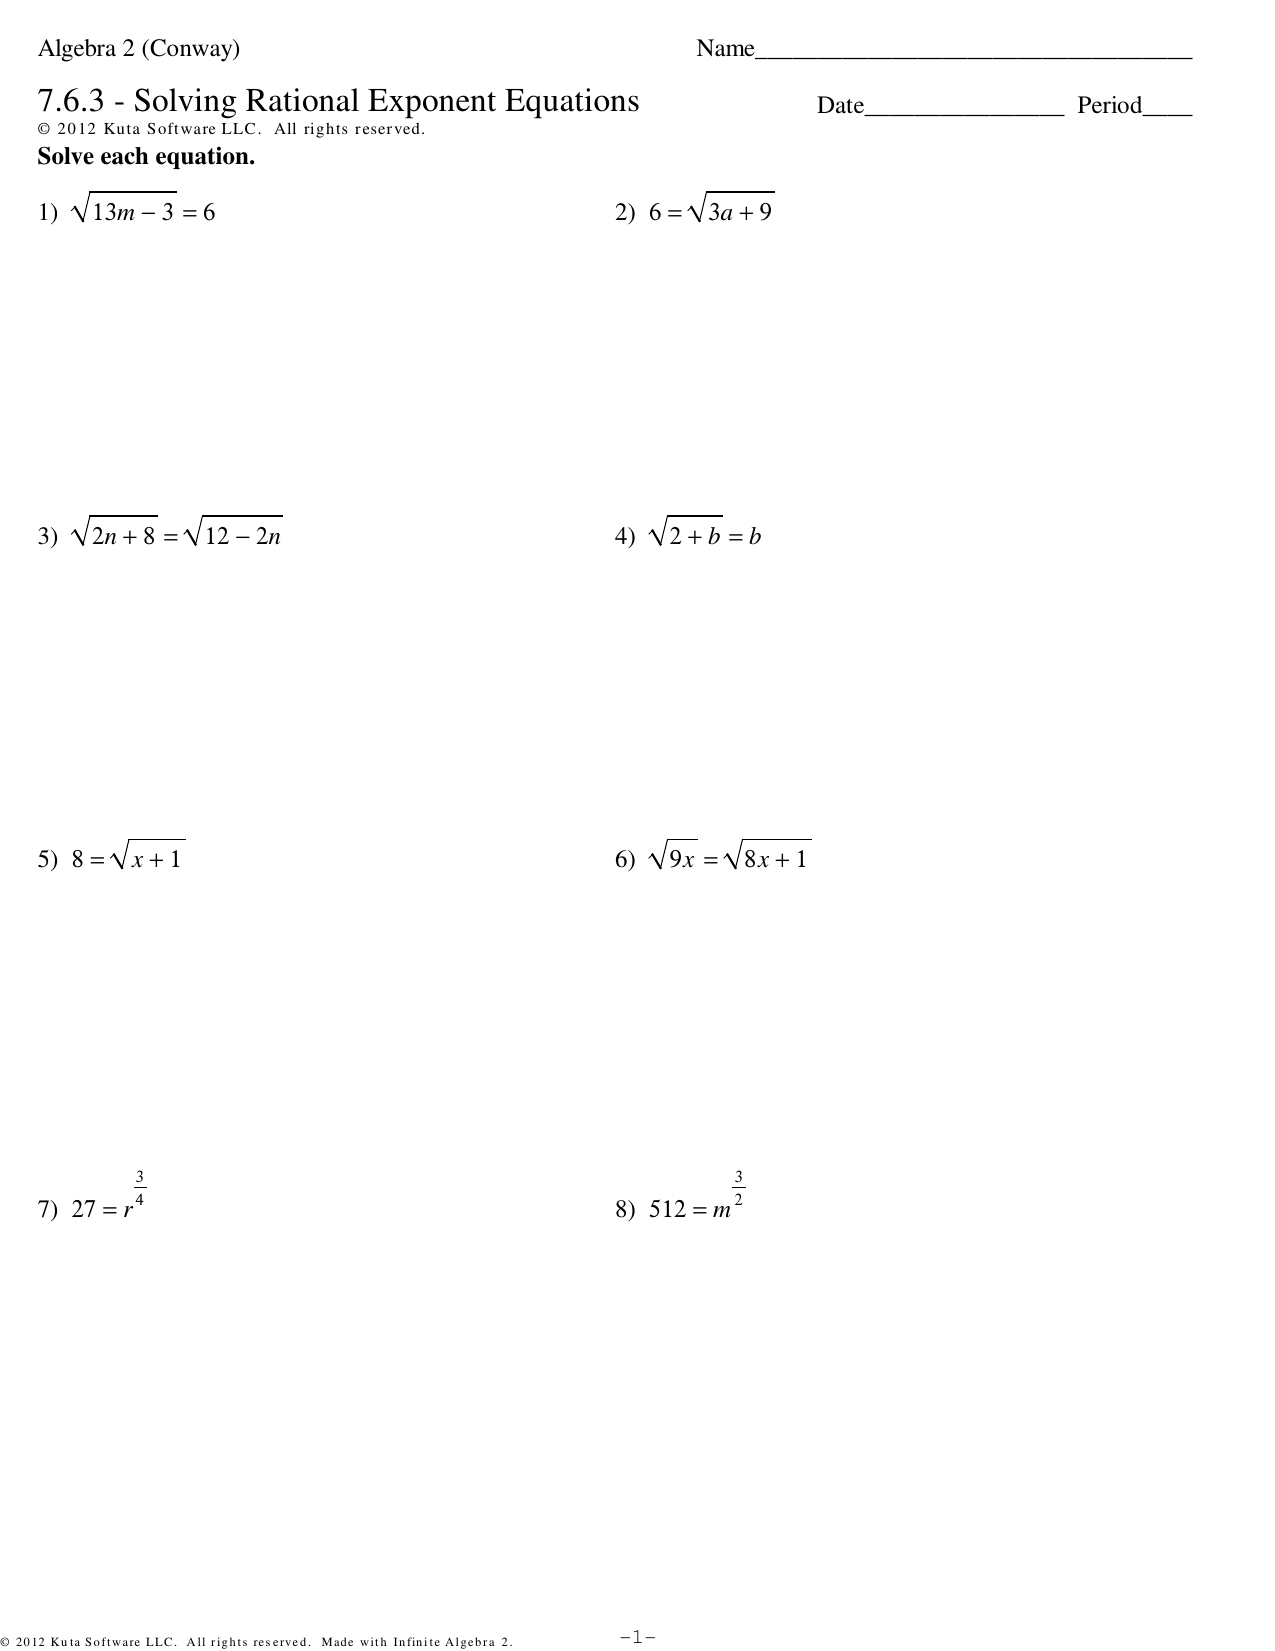 25.25.25 - Solving Rational Exponent Equations For Solving Exponential Equations Worksheet